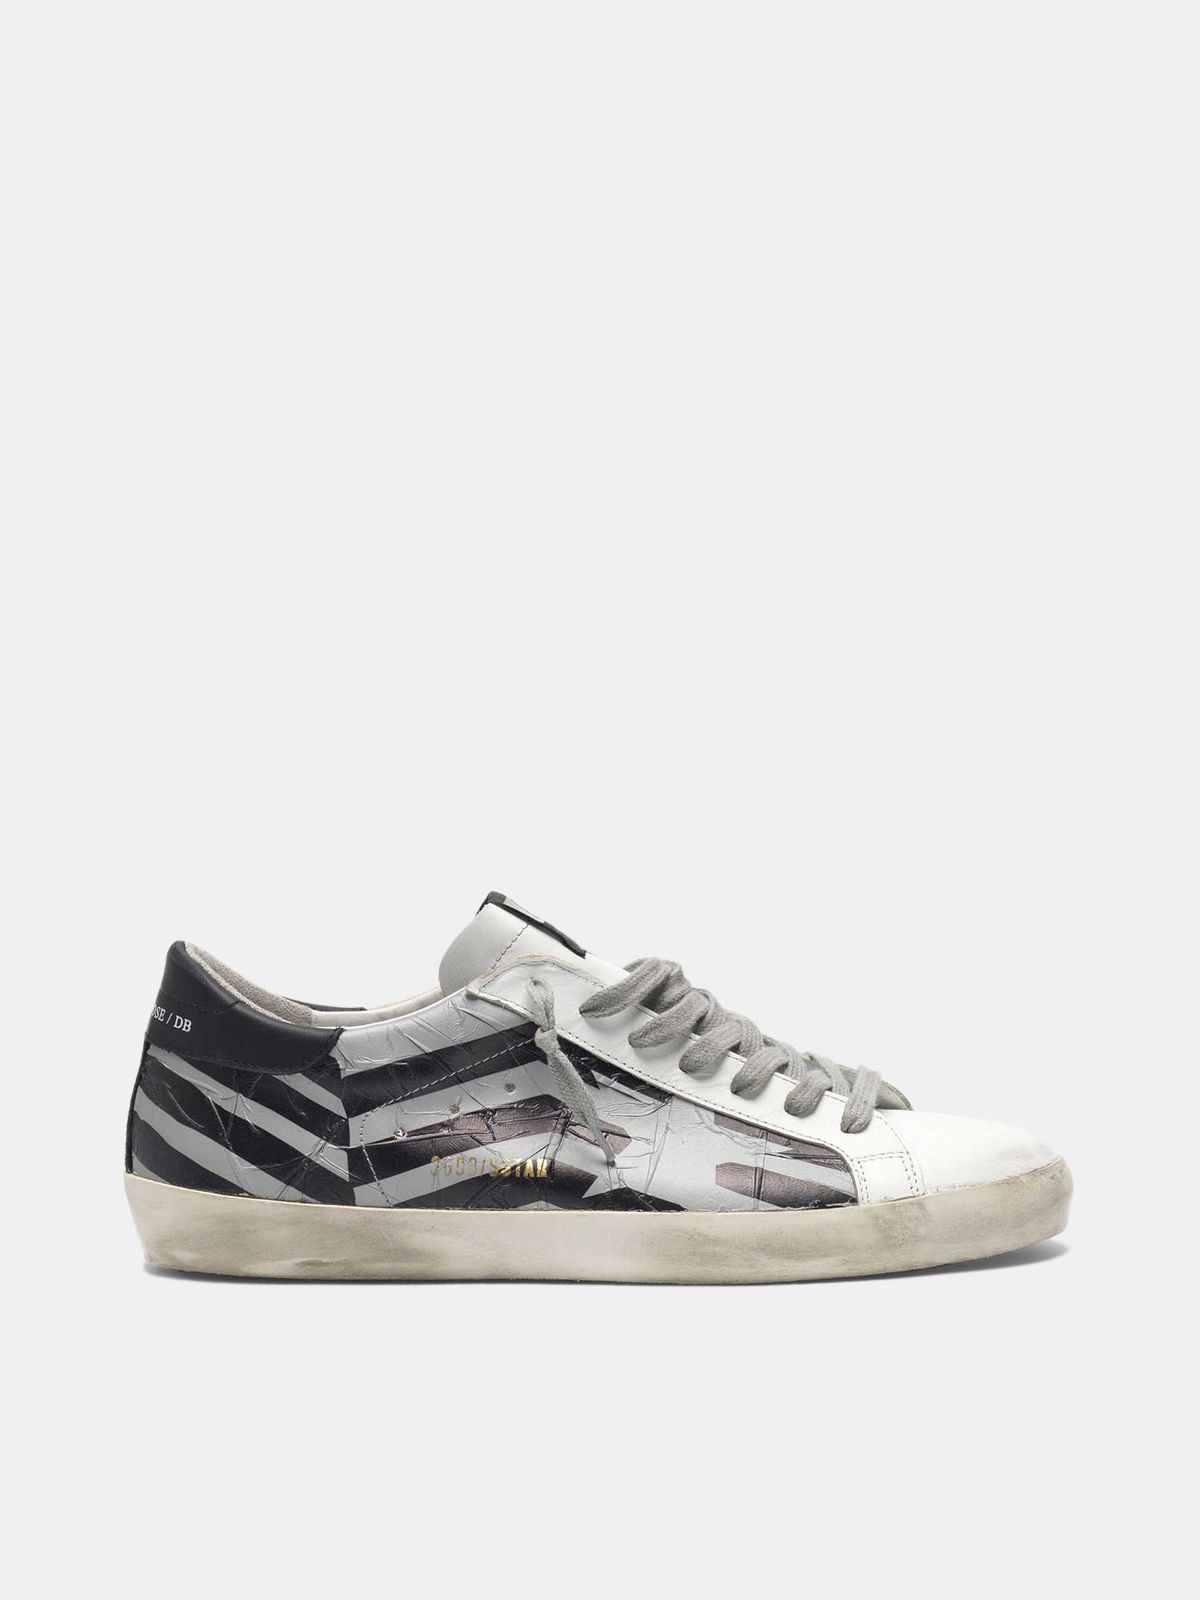 golden goose taped sneakers